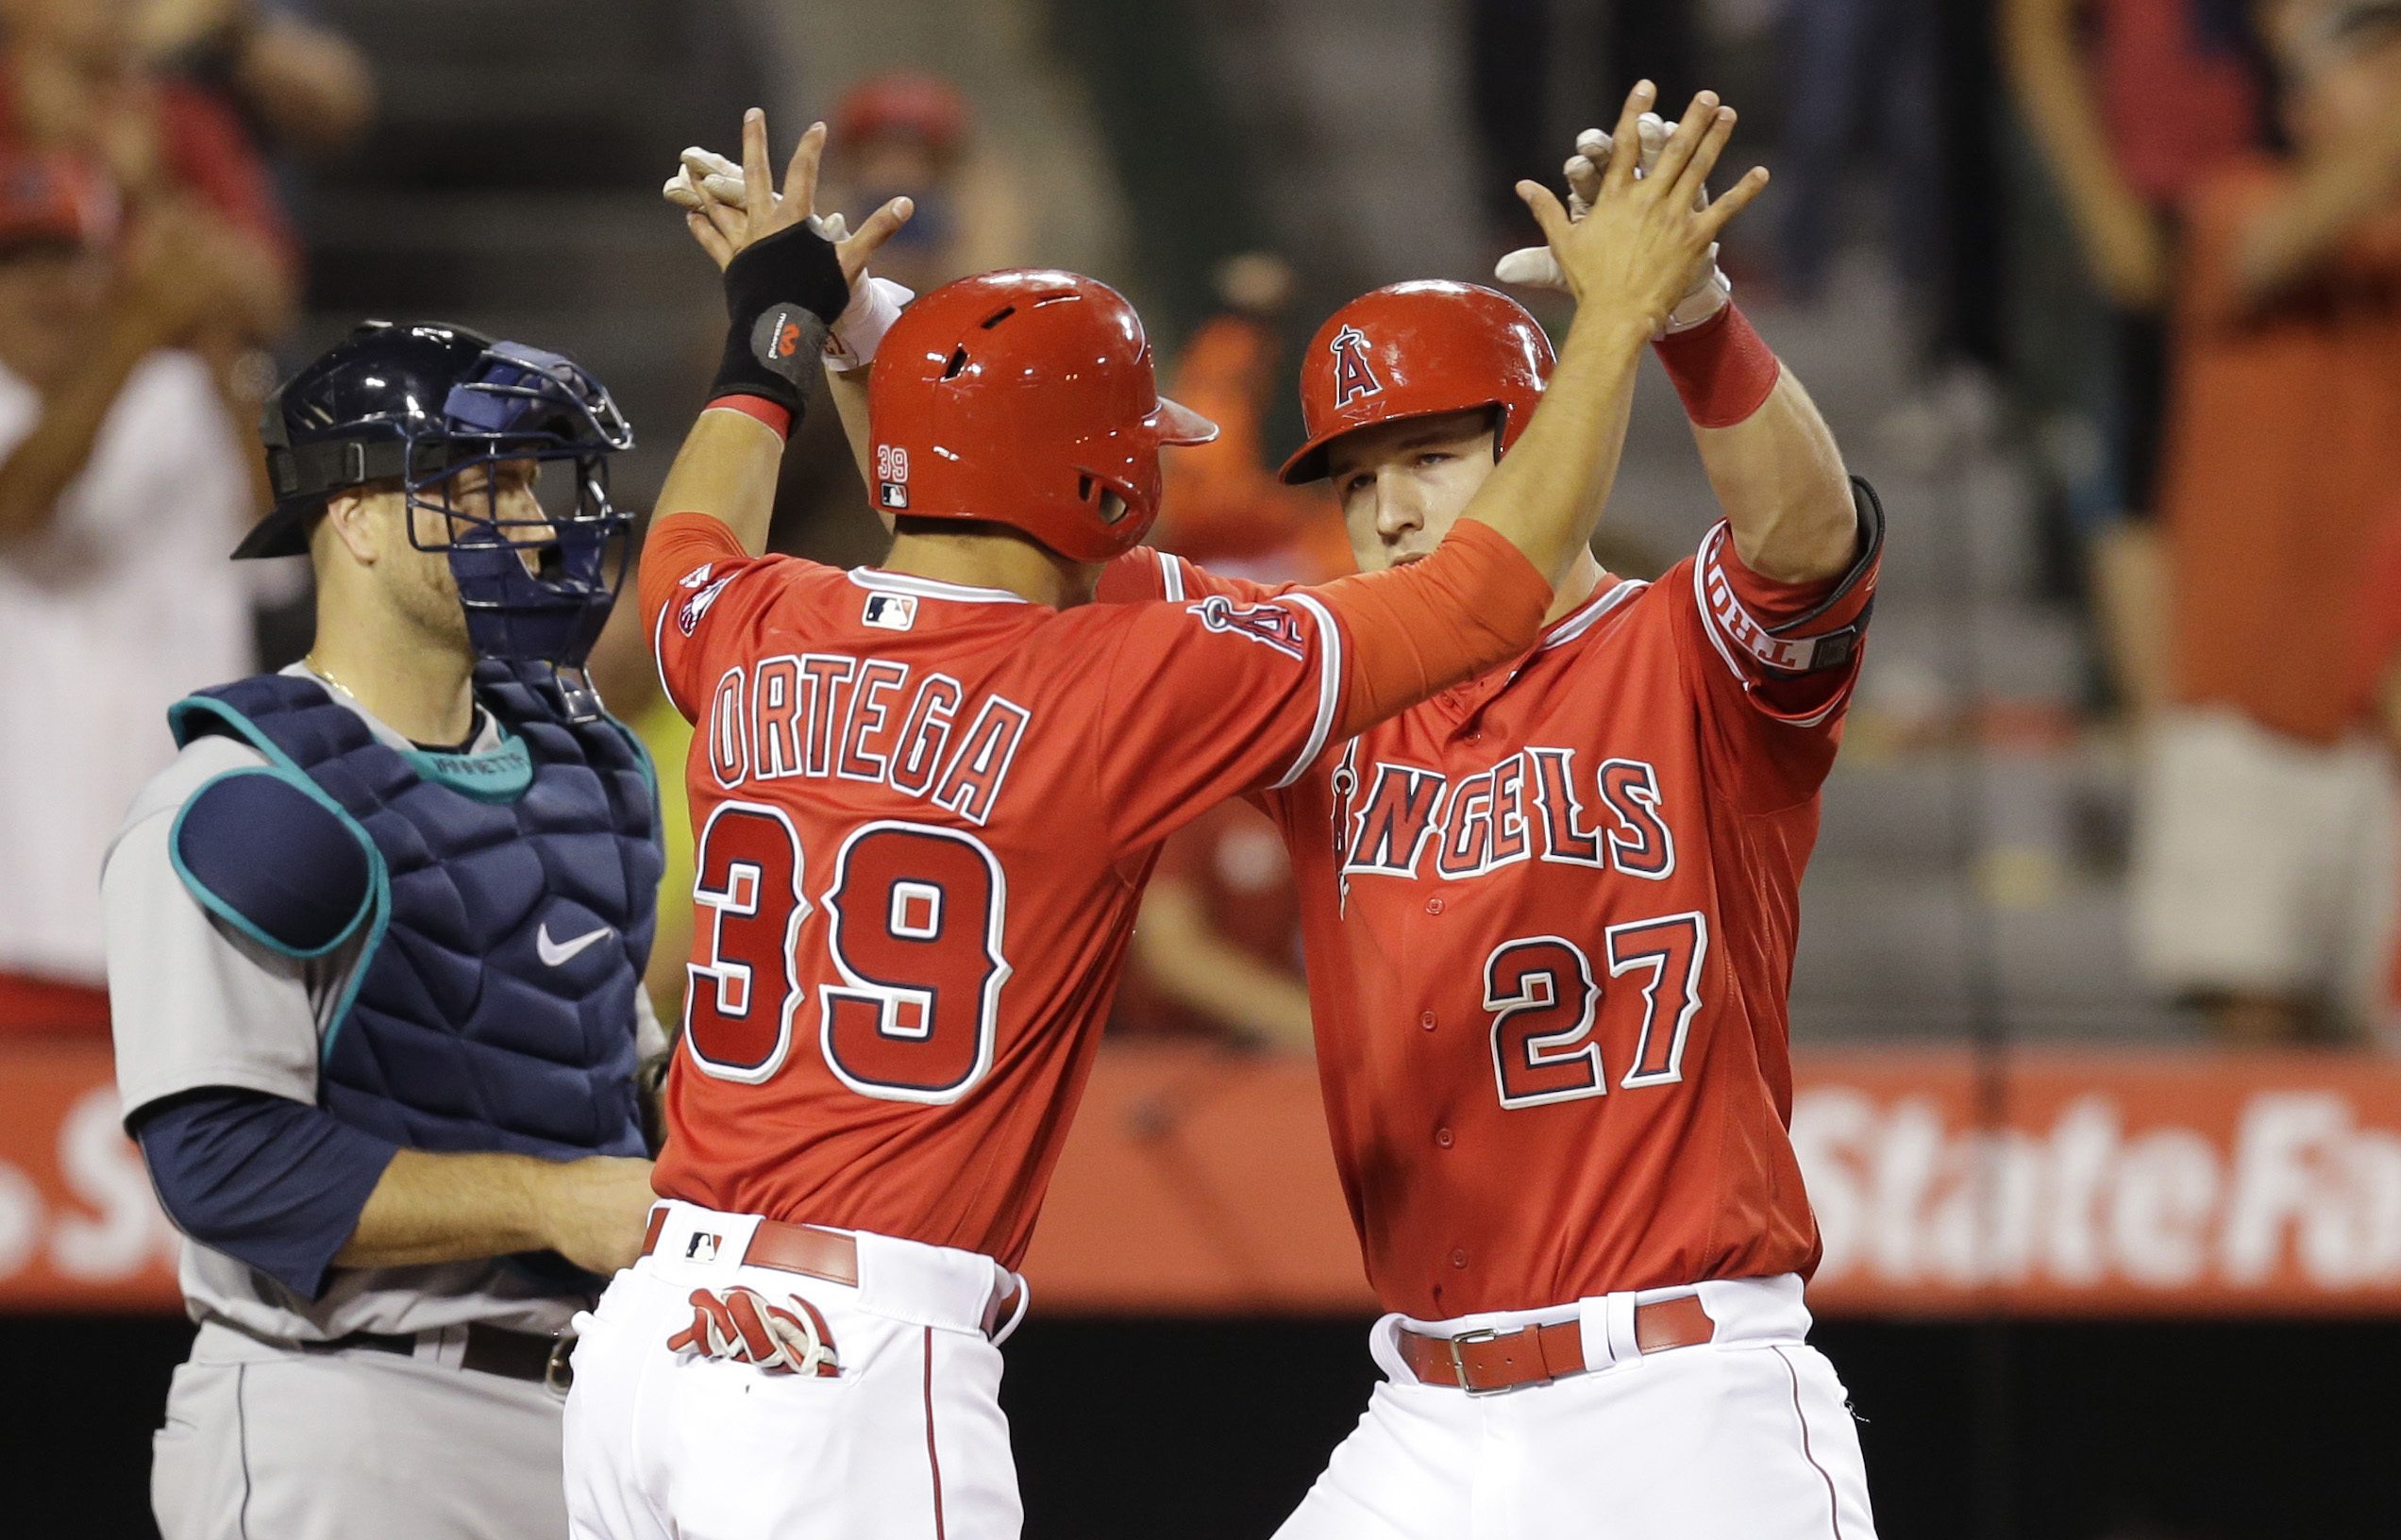 Los Angeles Angels' Mike Trout, right, celebrates his two-run home run with teammate Rafael Ortega during the sixth inning of a baseball game against the Seattle Mariners, Saturday, April 23, 2016, in Anaheim, Calif. (AP Photo/Jae C.